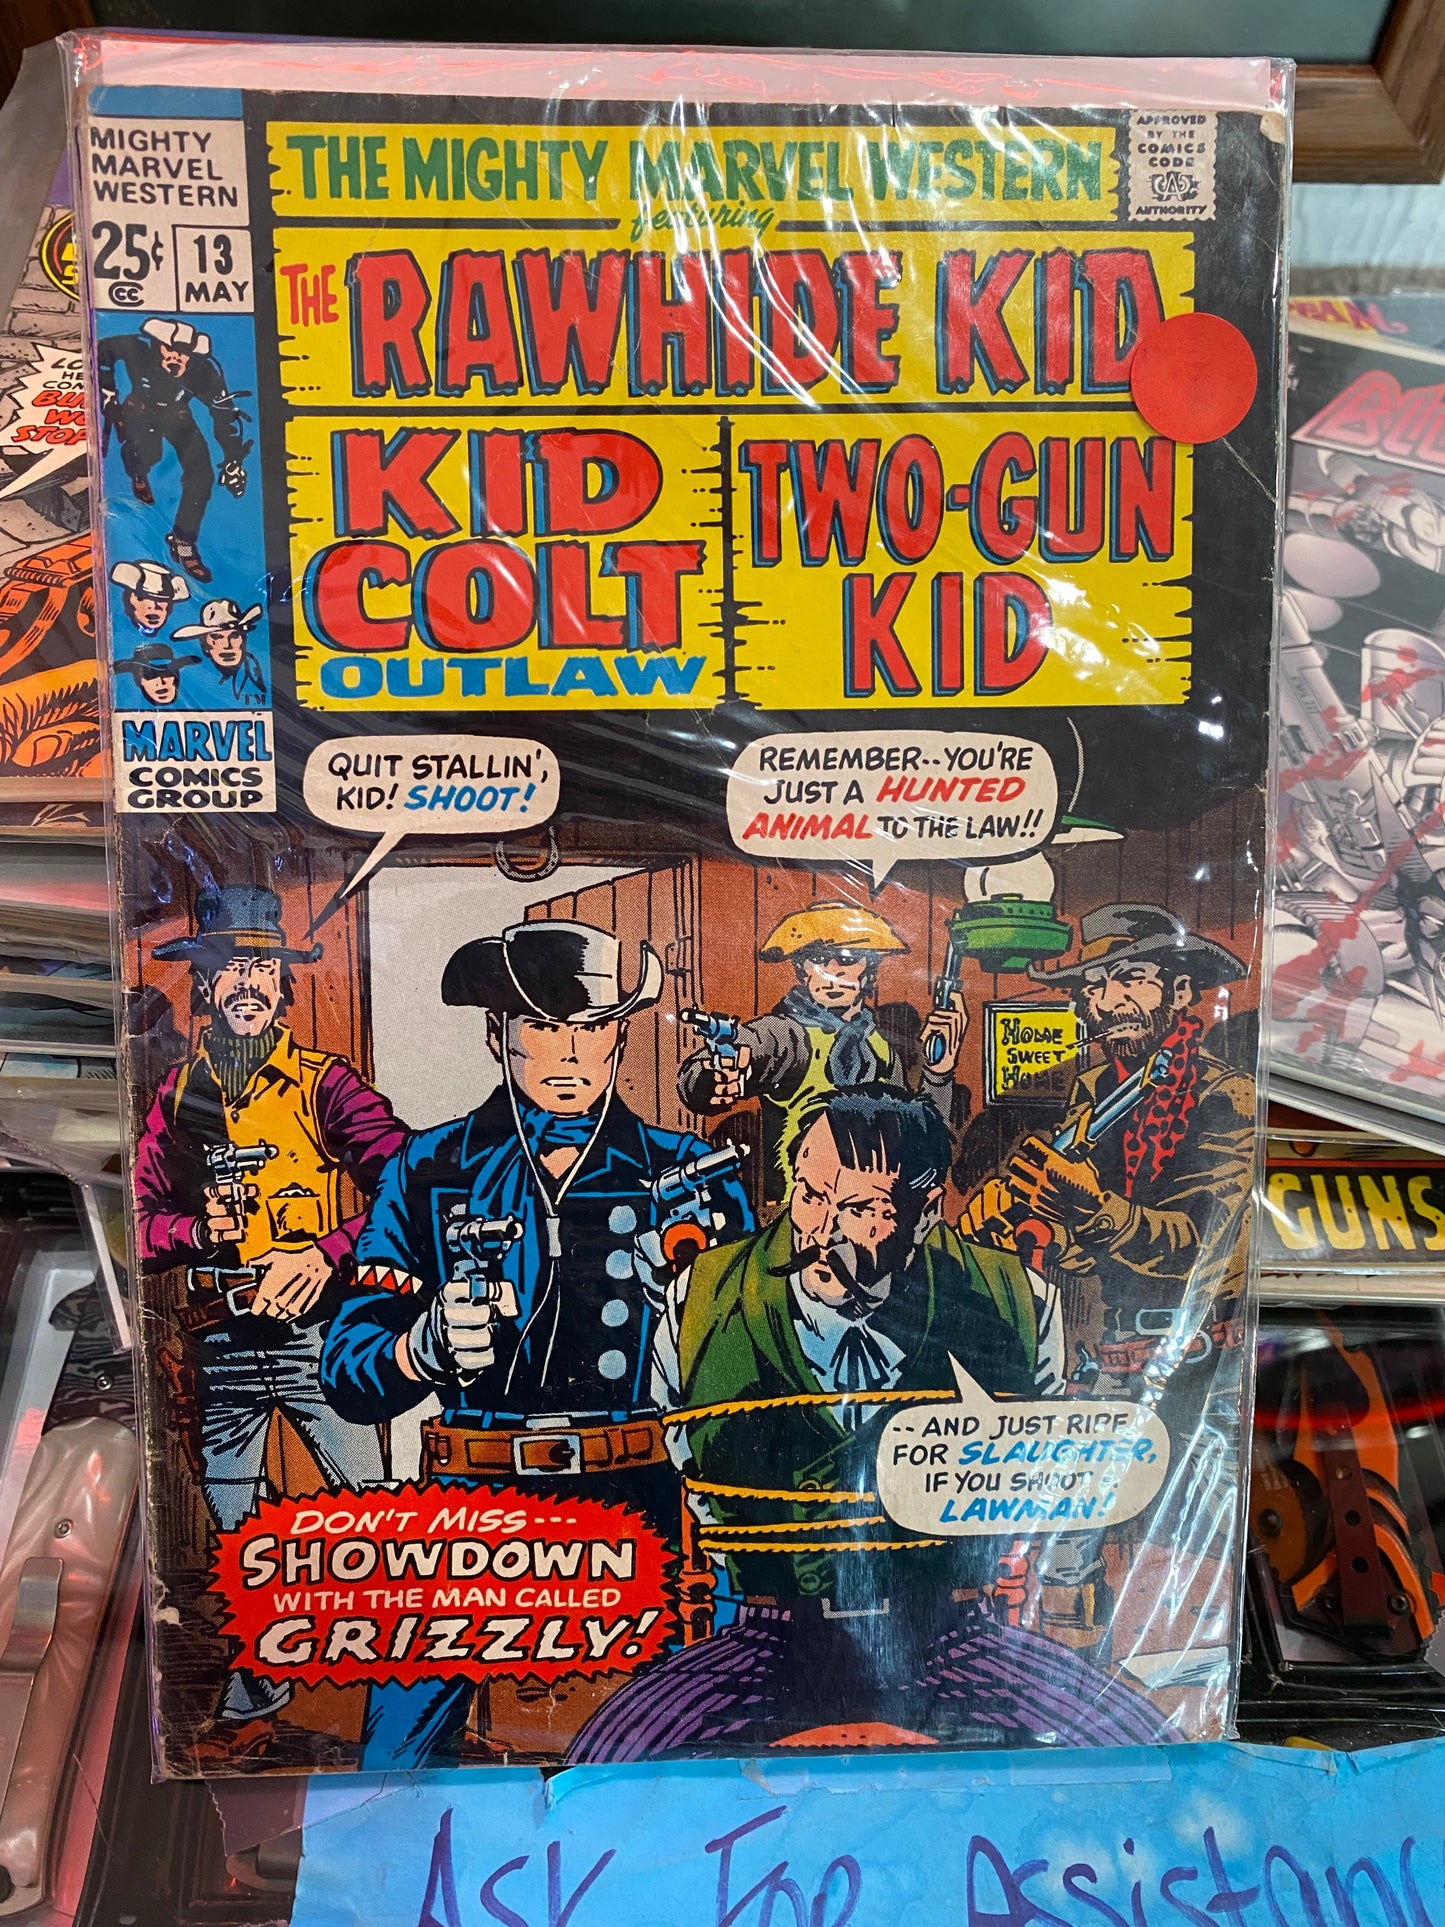 Marvel: The Rawhide Kid, Kid Colt Outlaw, and Two-Gun Kid May No.13